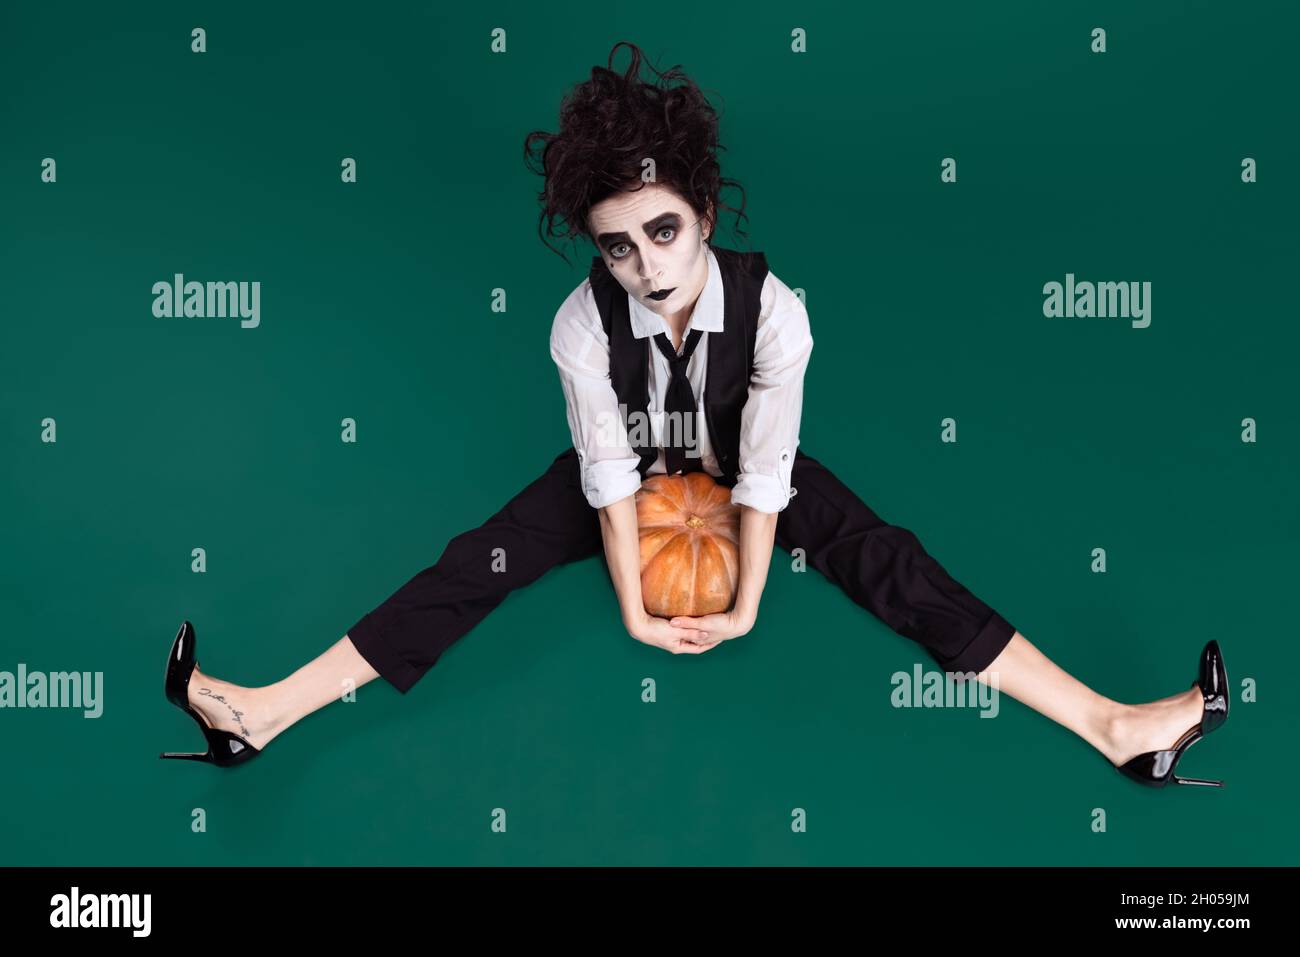 Top view portrait of expressive woman wearing costume of famous movie character, sitting with pumpkin isolated over green background Stock Photo